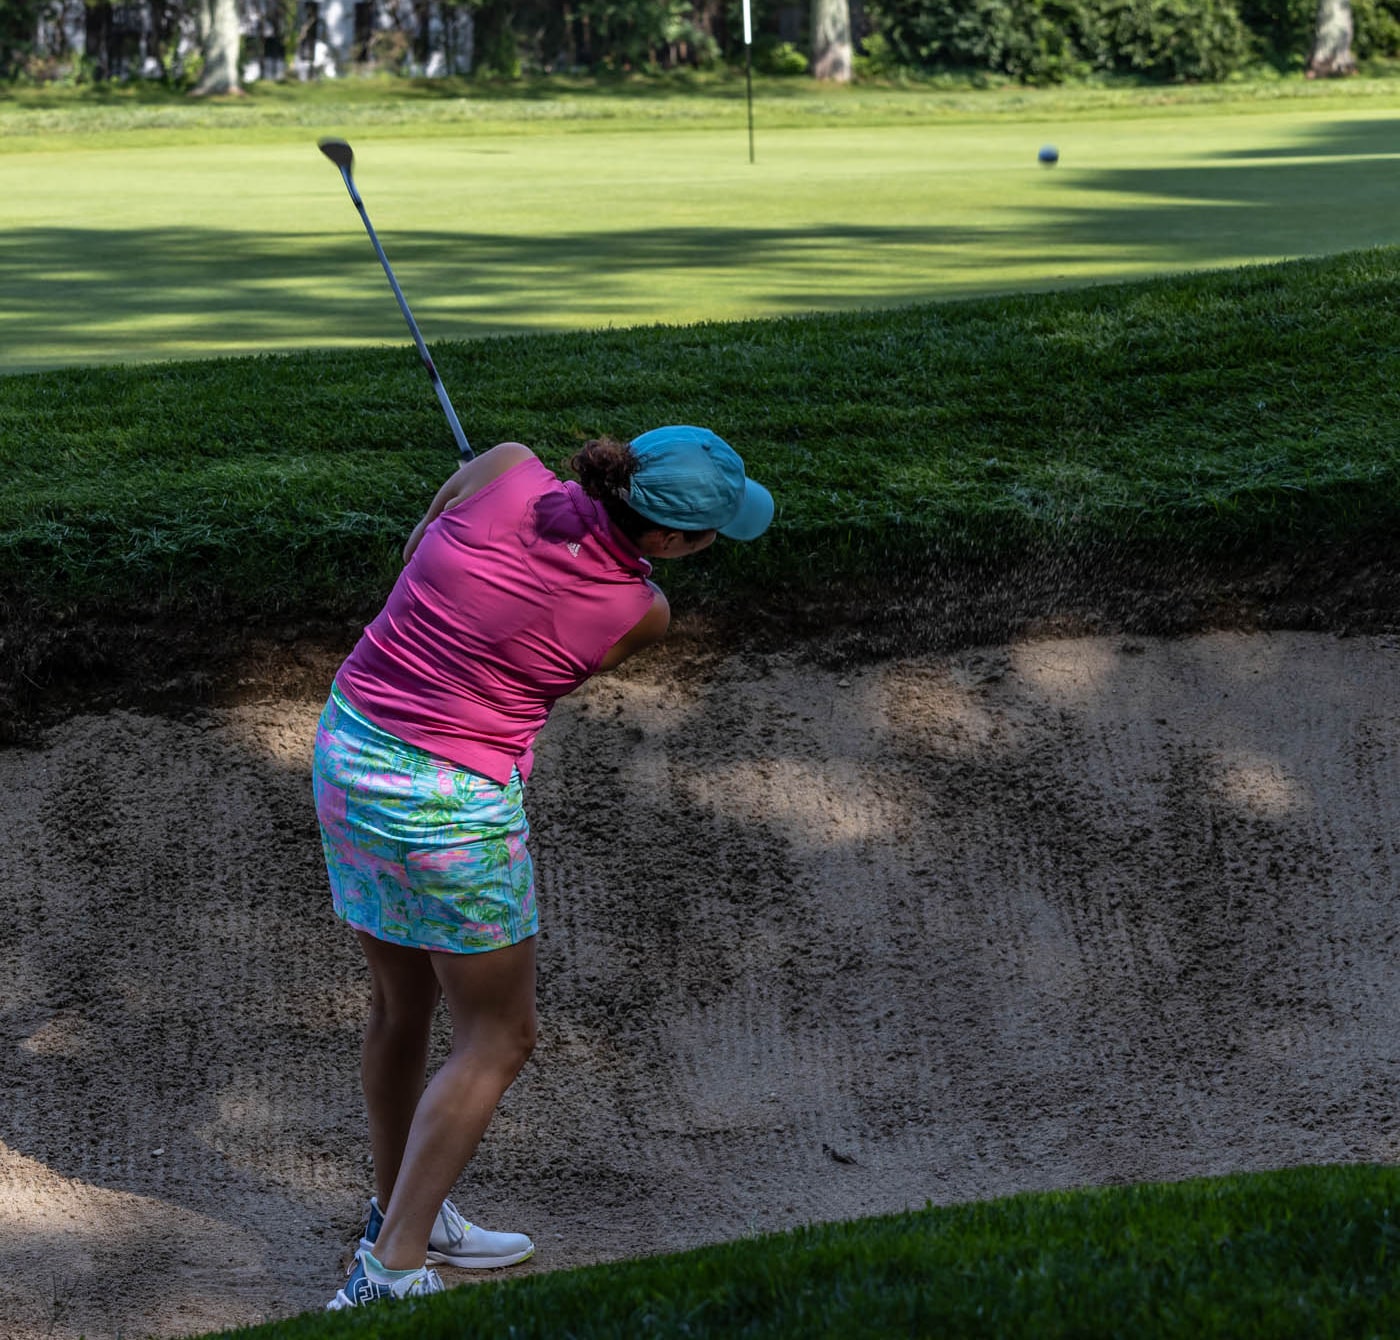 Country-Club-Of-New-Bedford FB-2023-Womens-FB-Gallery August-2023-Country-Club-Of-New-Bedford-FB-2023-Womens-FB-Gallery August-2023-Womens-FB-Gallery-Tuesday-Photos-Image-1